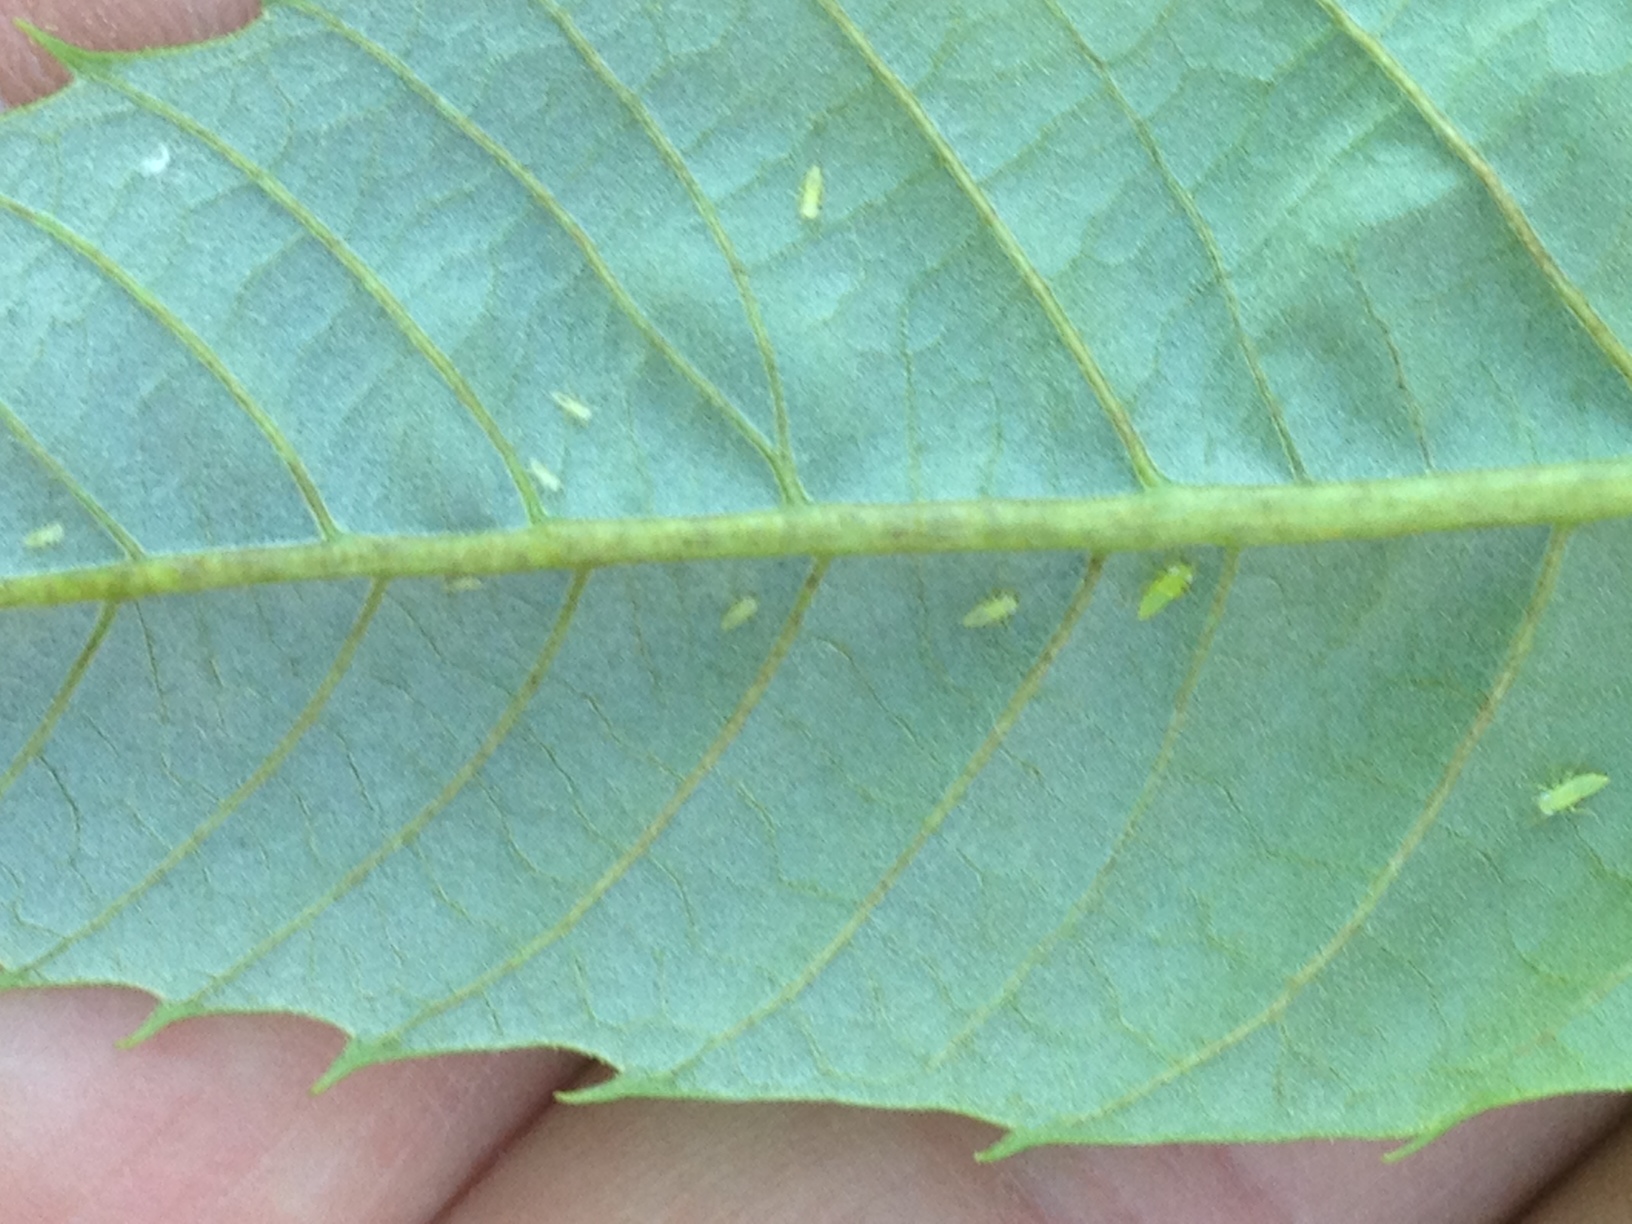 Potato leafhopper adults and nymphs